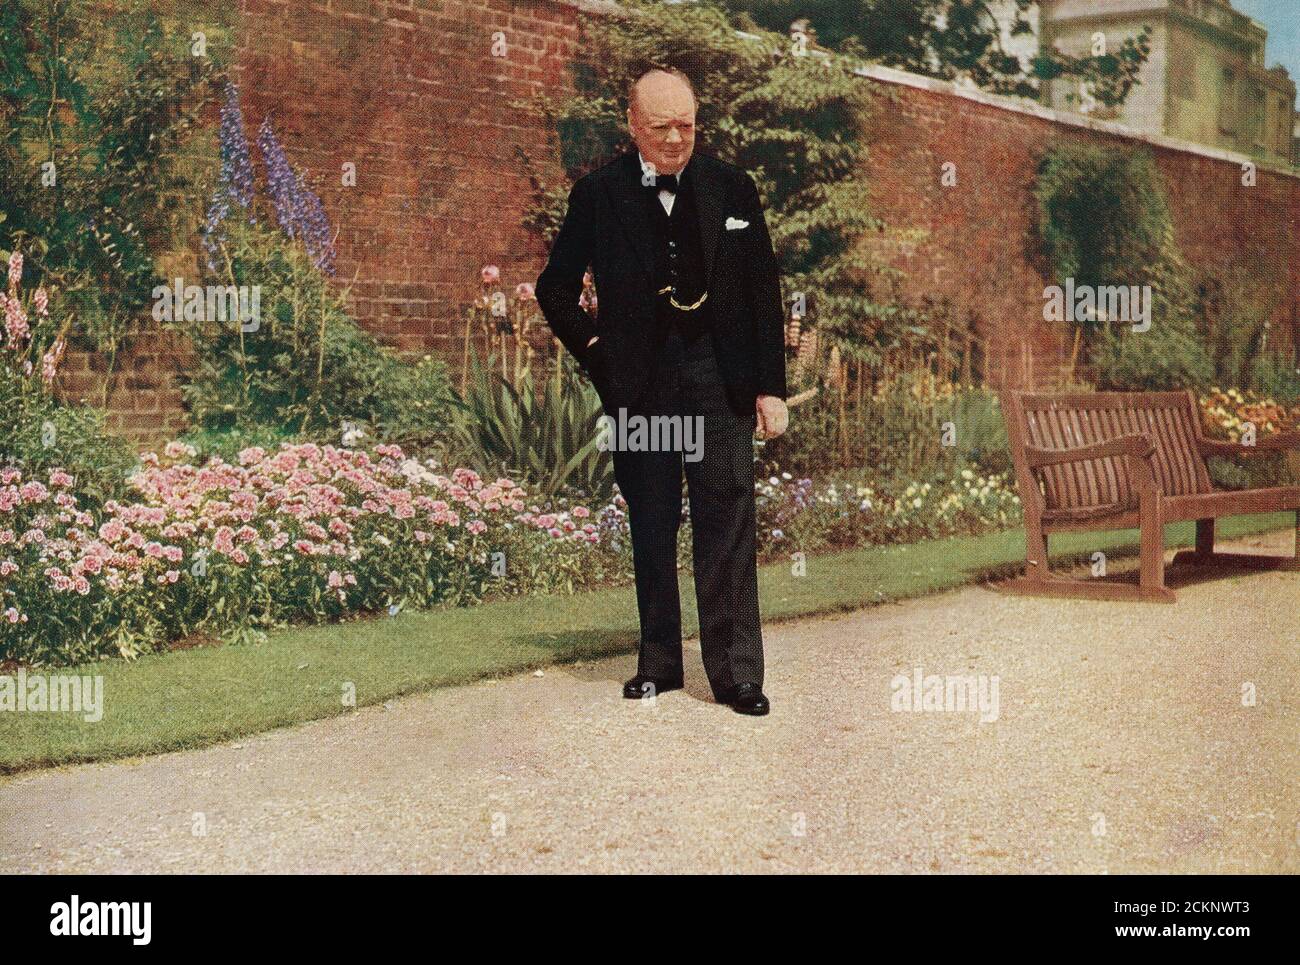 Winston Churchill in the garden of 10 Downing Street, during World War Two.  Sir Winston Leonard Spencer-Churchill, 1874 – 1965. British politician, army officer, writer and twice Prime Minister of the United Kingdom. Stock Photo